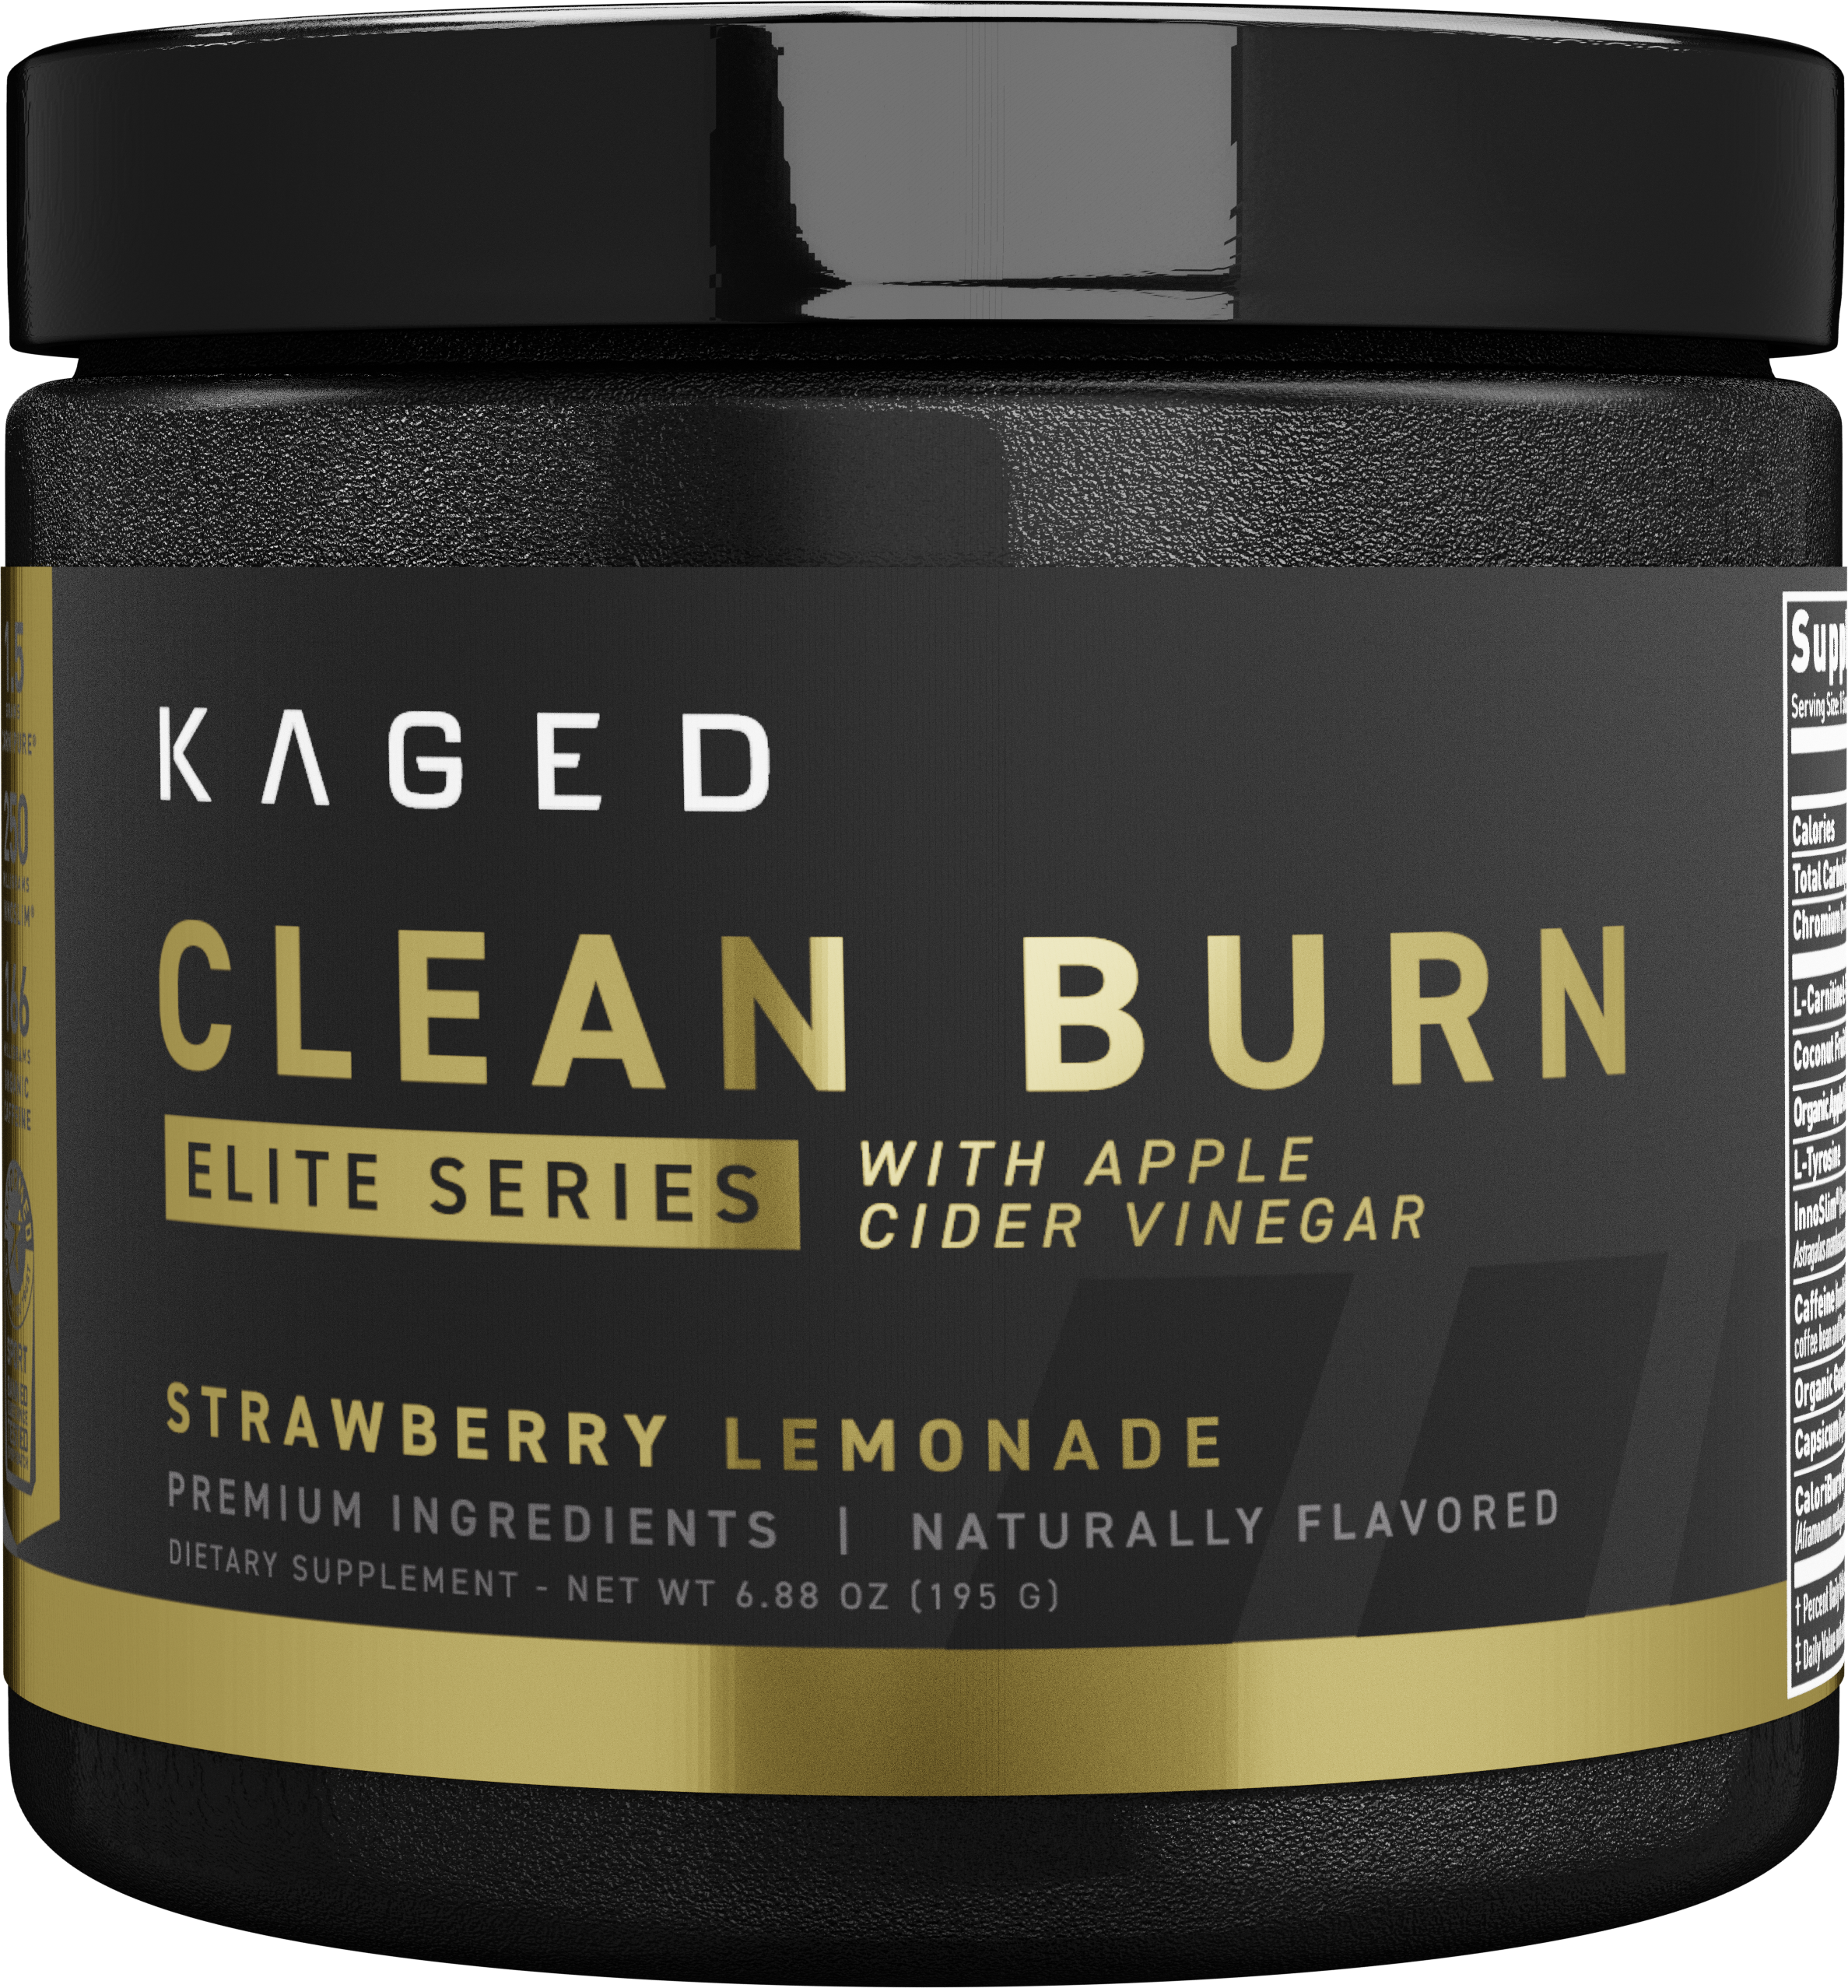 Kaged ELITE Series: 11 New Products Now Live at GNC